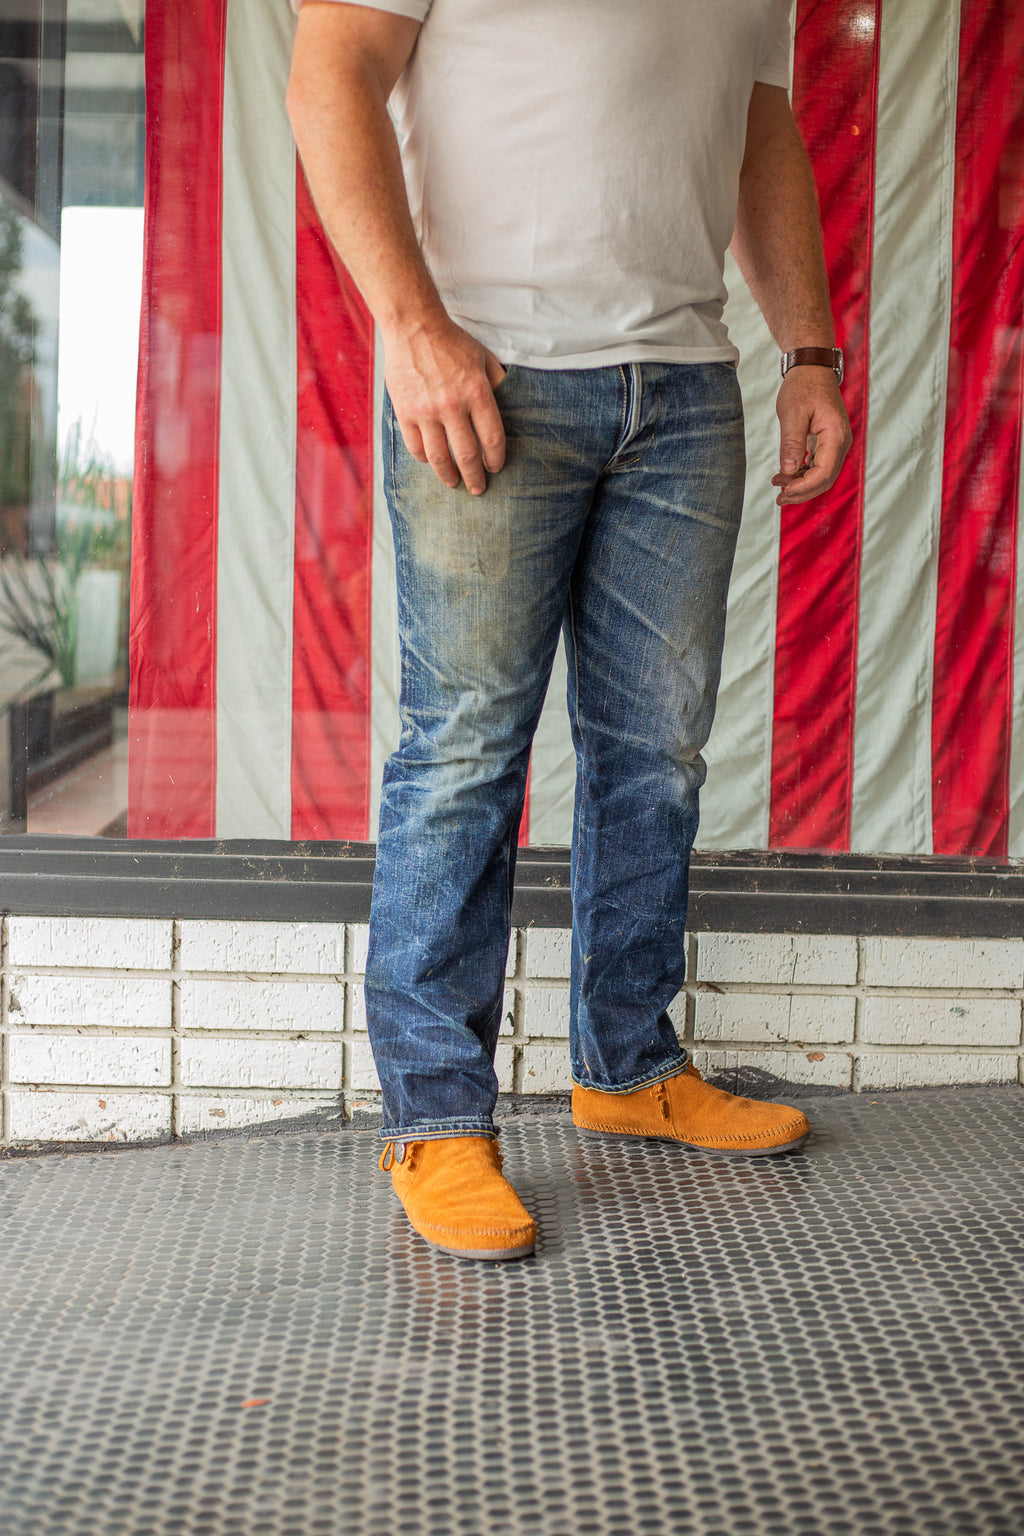 Hd Xxxx Video Download 16 Ag - 5 Different Ways to Wear Denim in the Summer â€“ Iron Shop Provisions